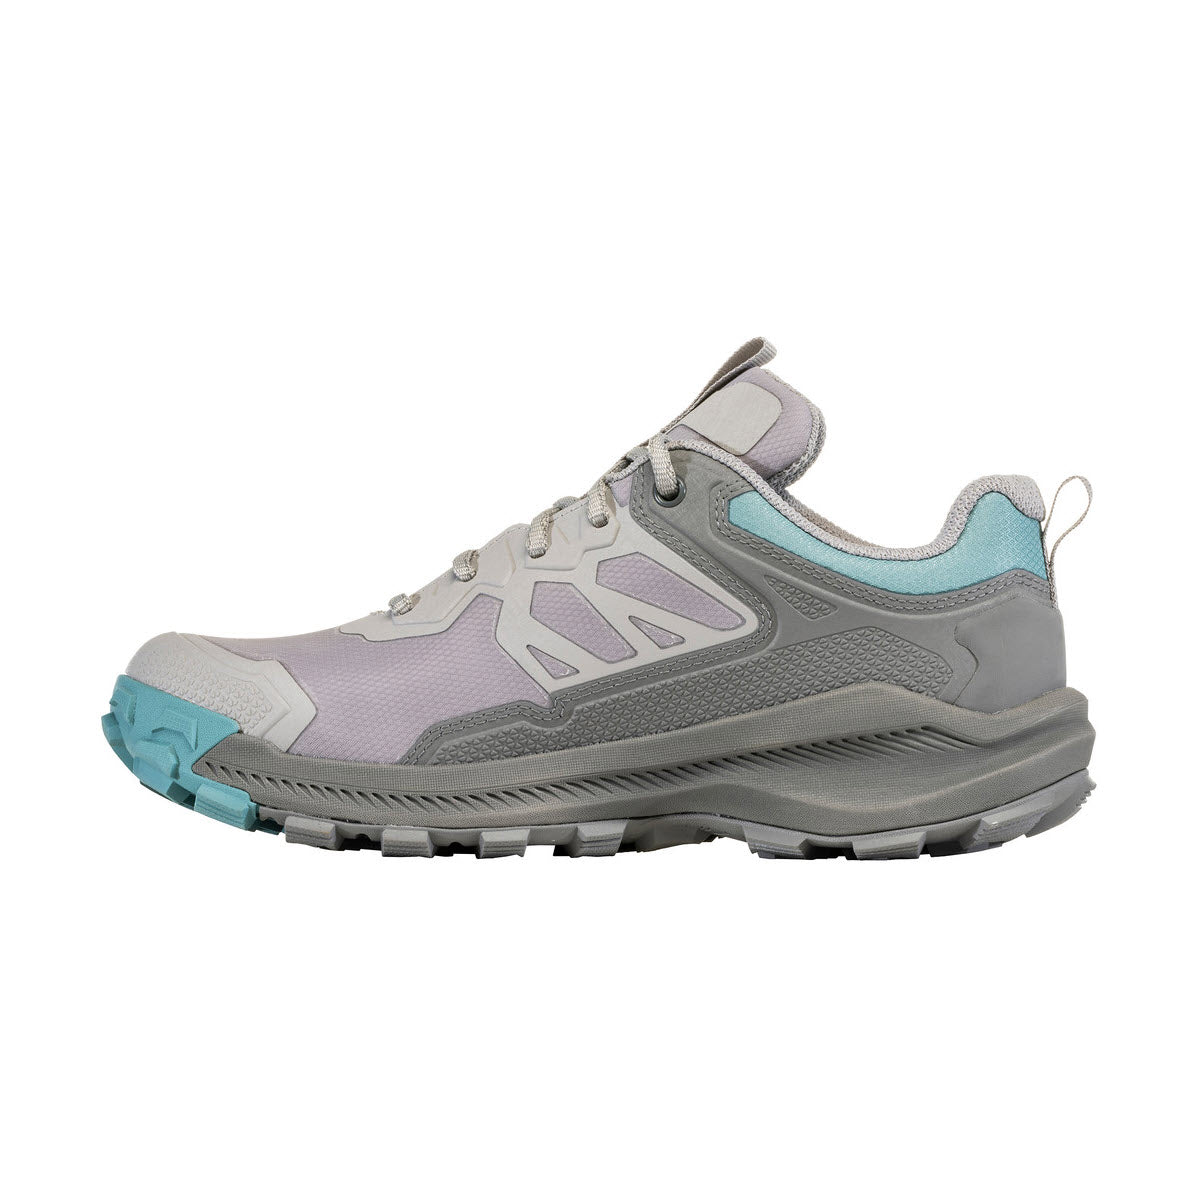 A side view of a modern OBOZ KATABATIC LOW B-DRY ISLAND hiking shoe by Oboz featuring a gray and pastel color scheme.